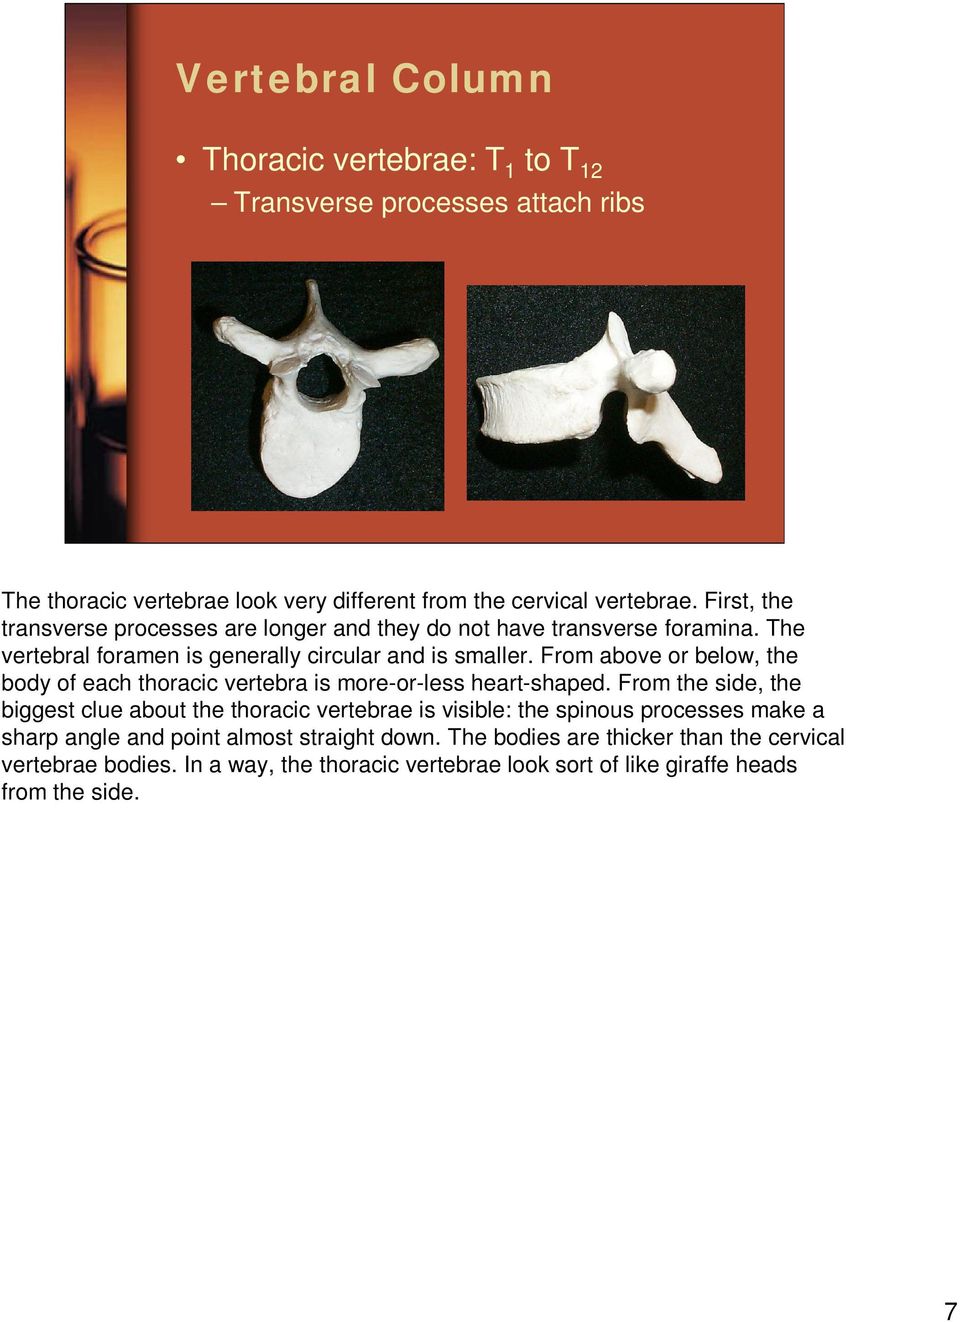 From above or below, the body of each thoracic vertebra is more-or-less heart-shaped.